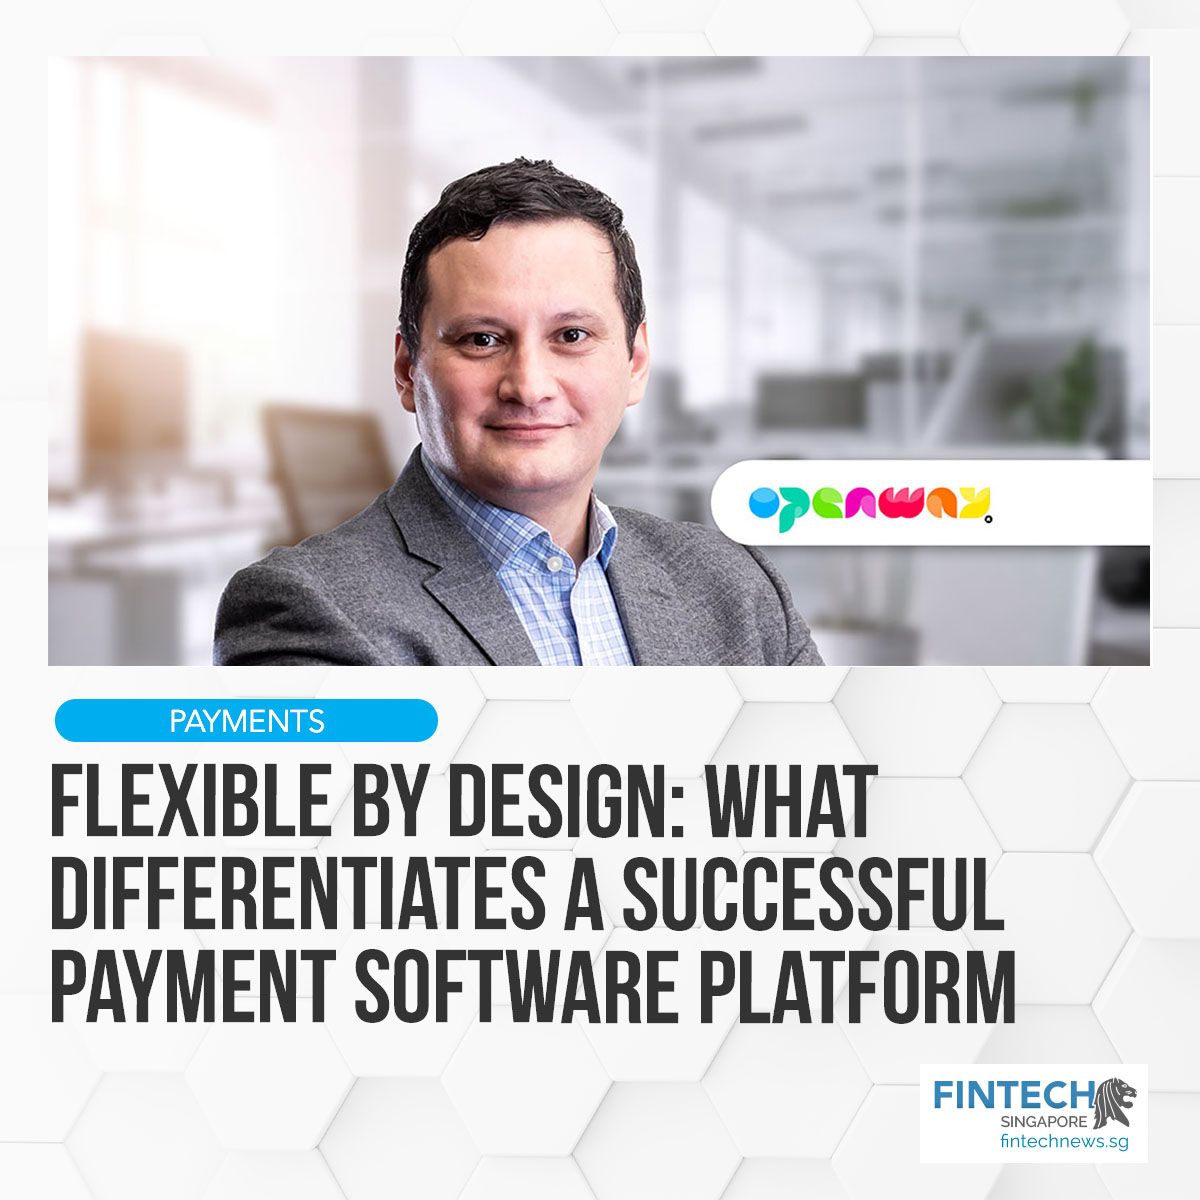 Payment flexibility is crucial in today's dynamic market influenced by AI, the metaverse, and digital currencies. 

Read more here: fintechnews.ph/62523/payments…

@OpenWaygroup #fintech #payments #financialservices